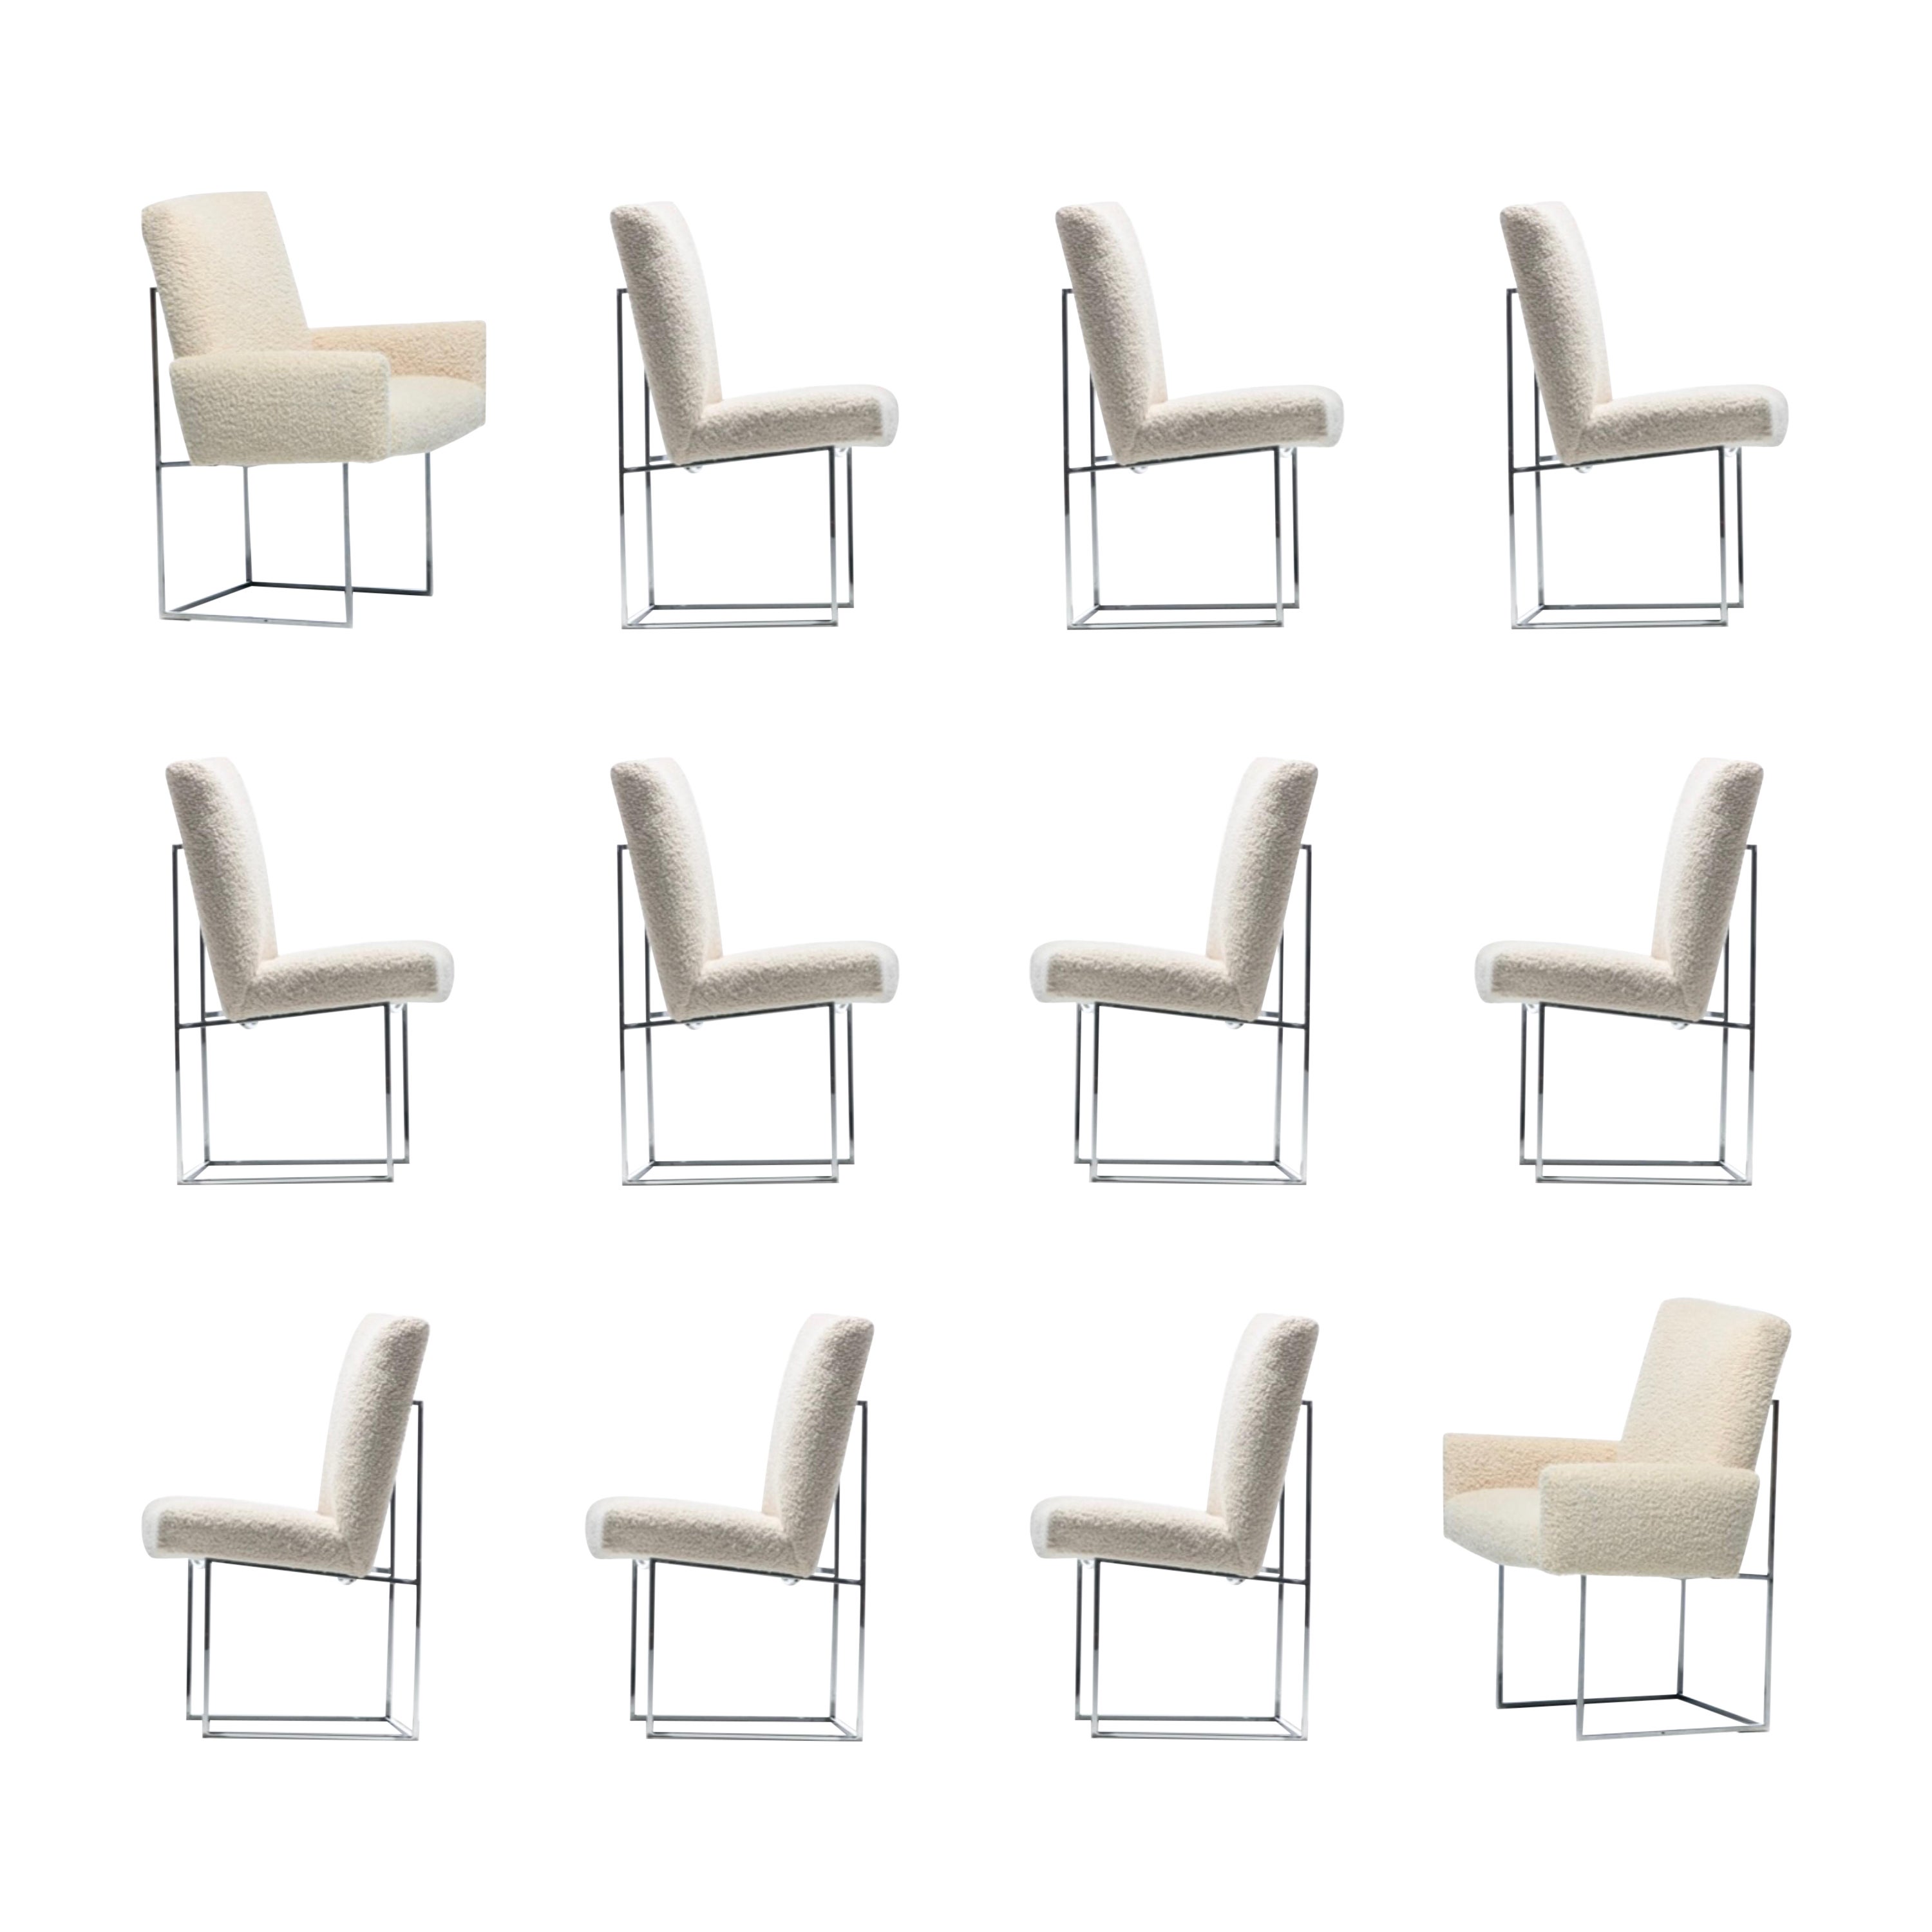 Set of Twelve Milo Baughman for Thayer Coggin Dining Chairs in Lux Ivory Bouclé